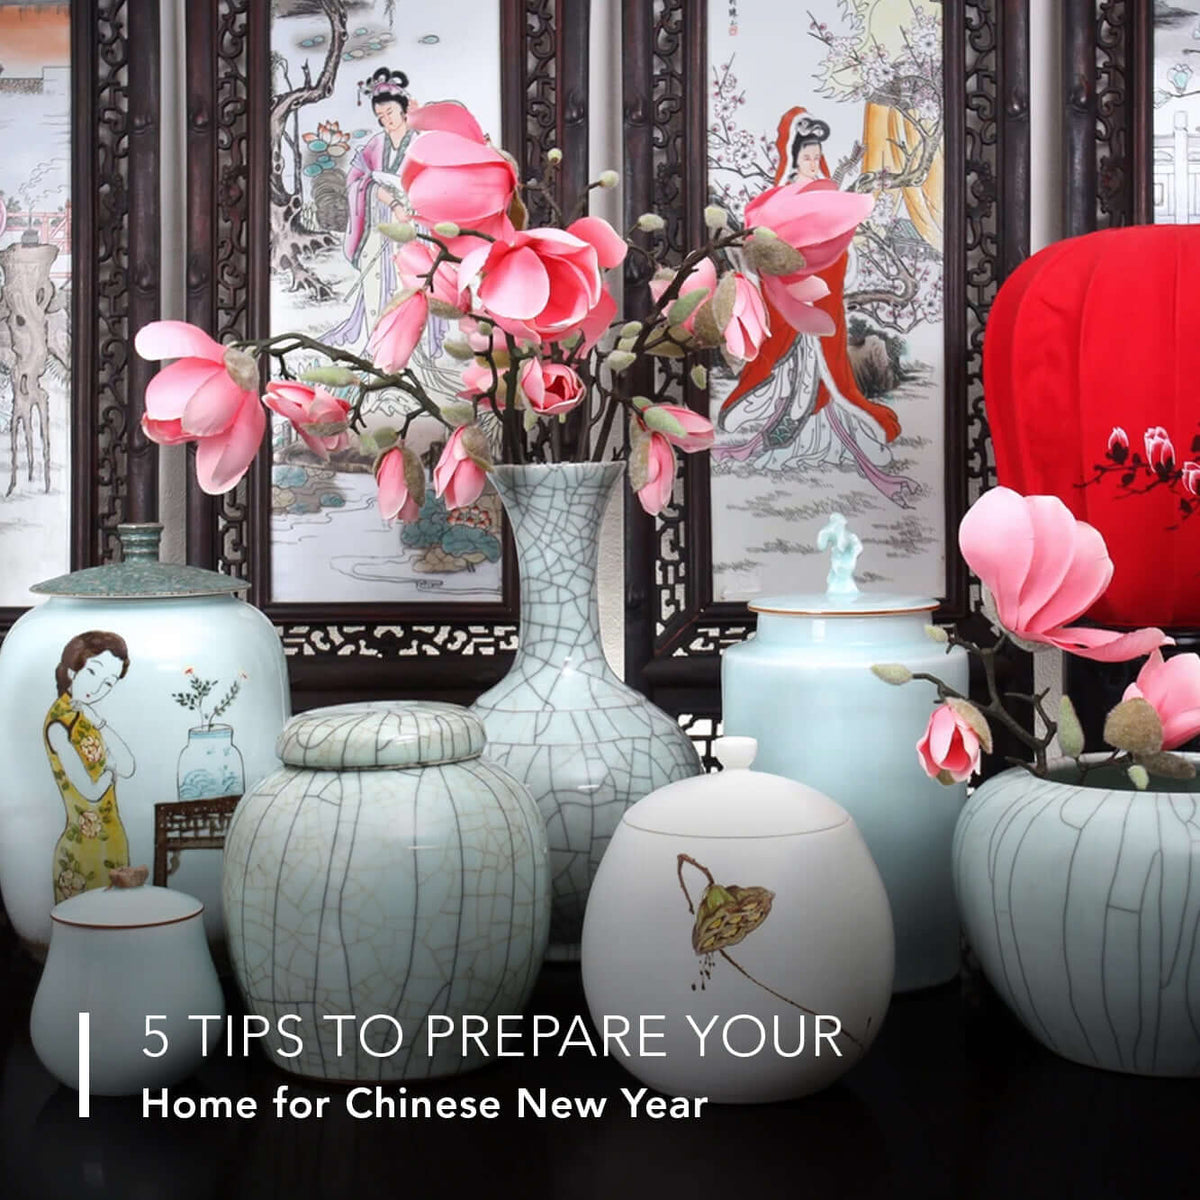 5 Tips to Prepare your Home for Chinese New Year